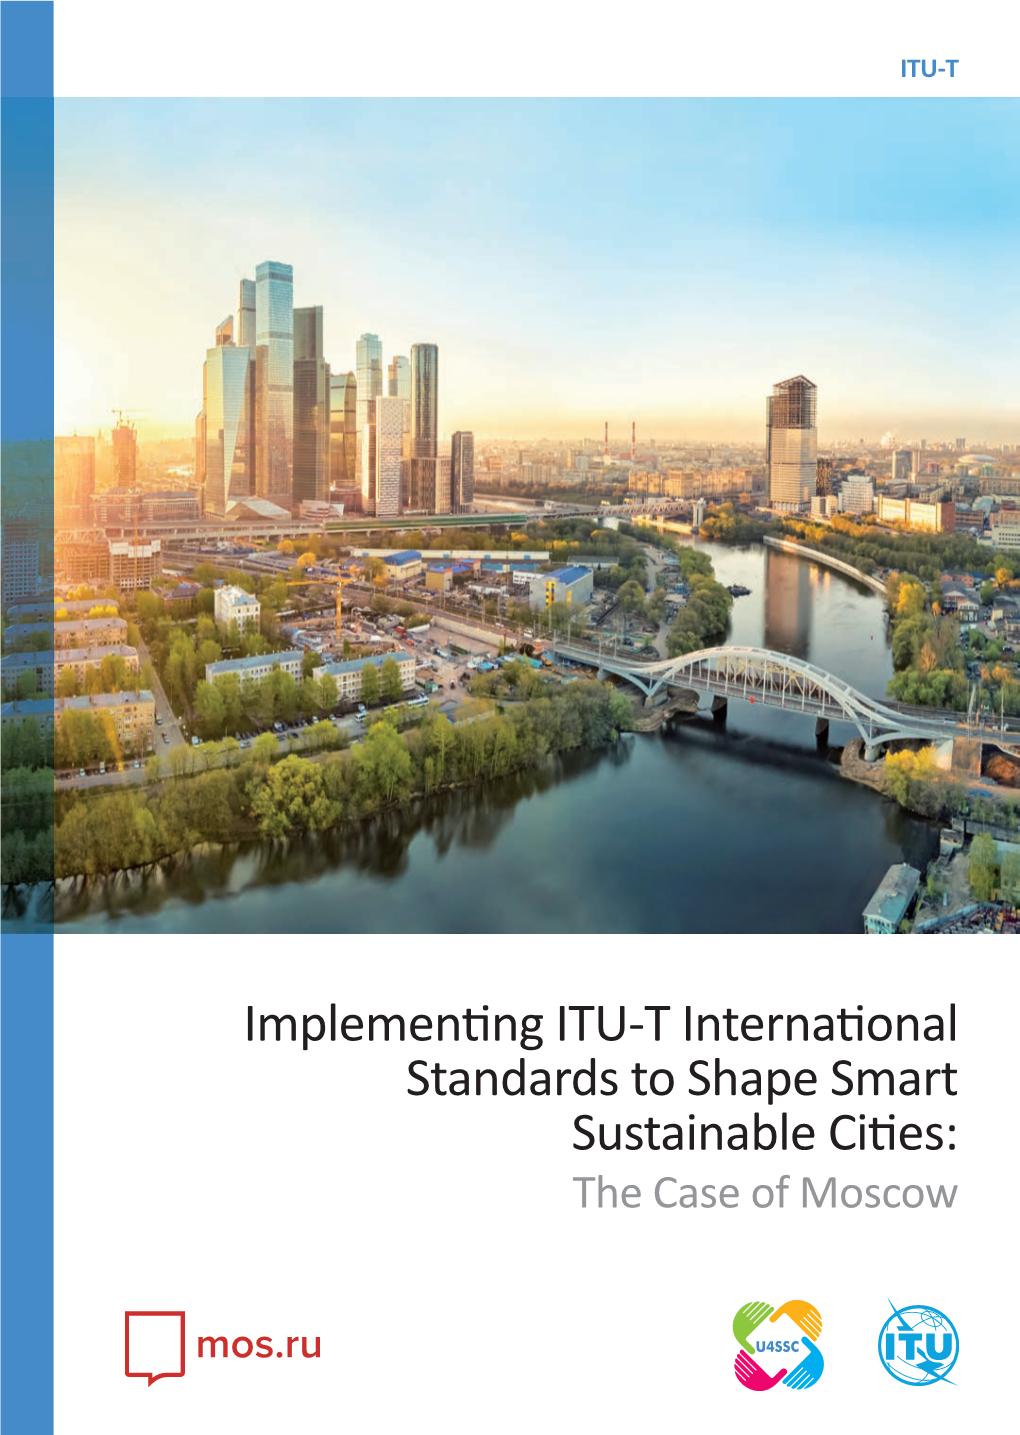 International Standards to Shape Smart Sustainable Cities - the Case of Moscow